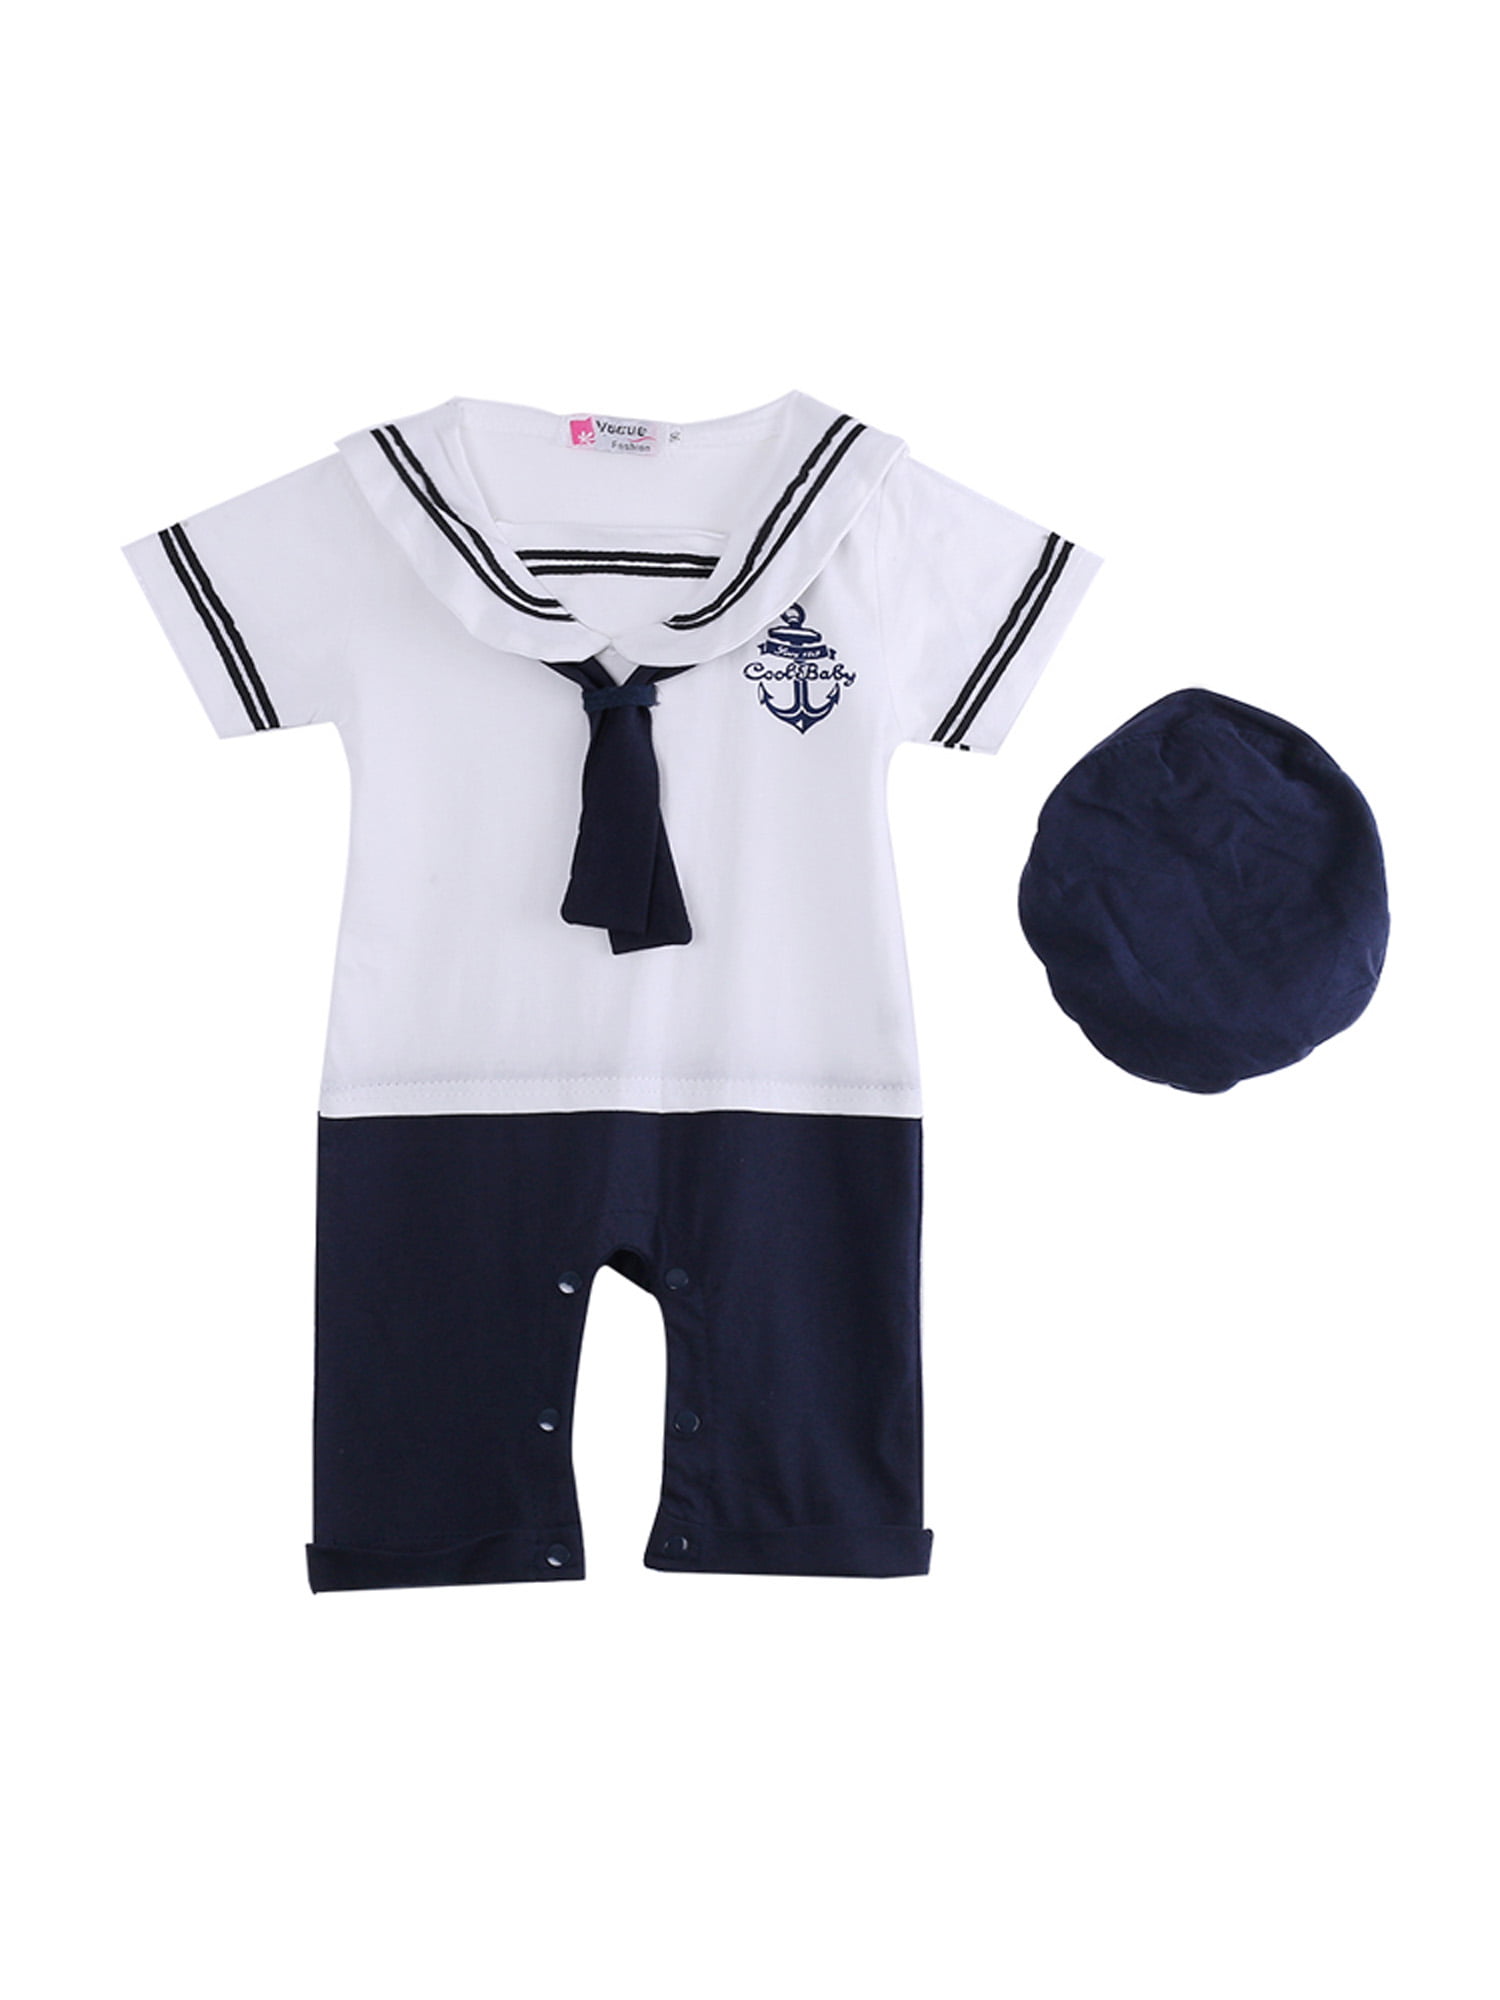 Anchor Nautical  Romper 12 Months Can Do Other Sizes Please Ask 